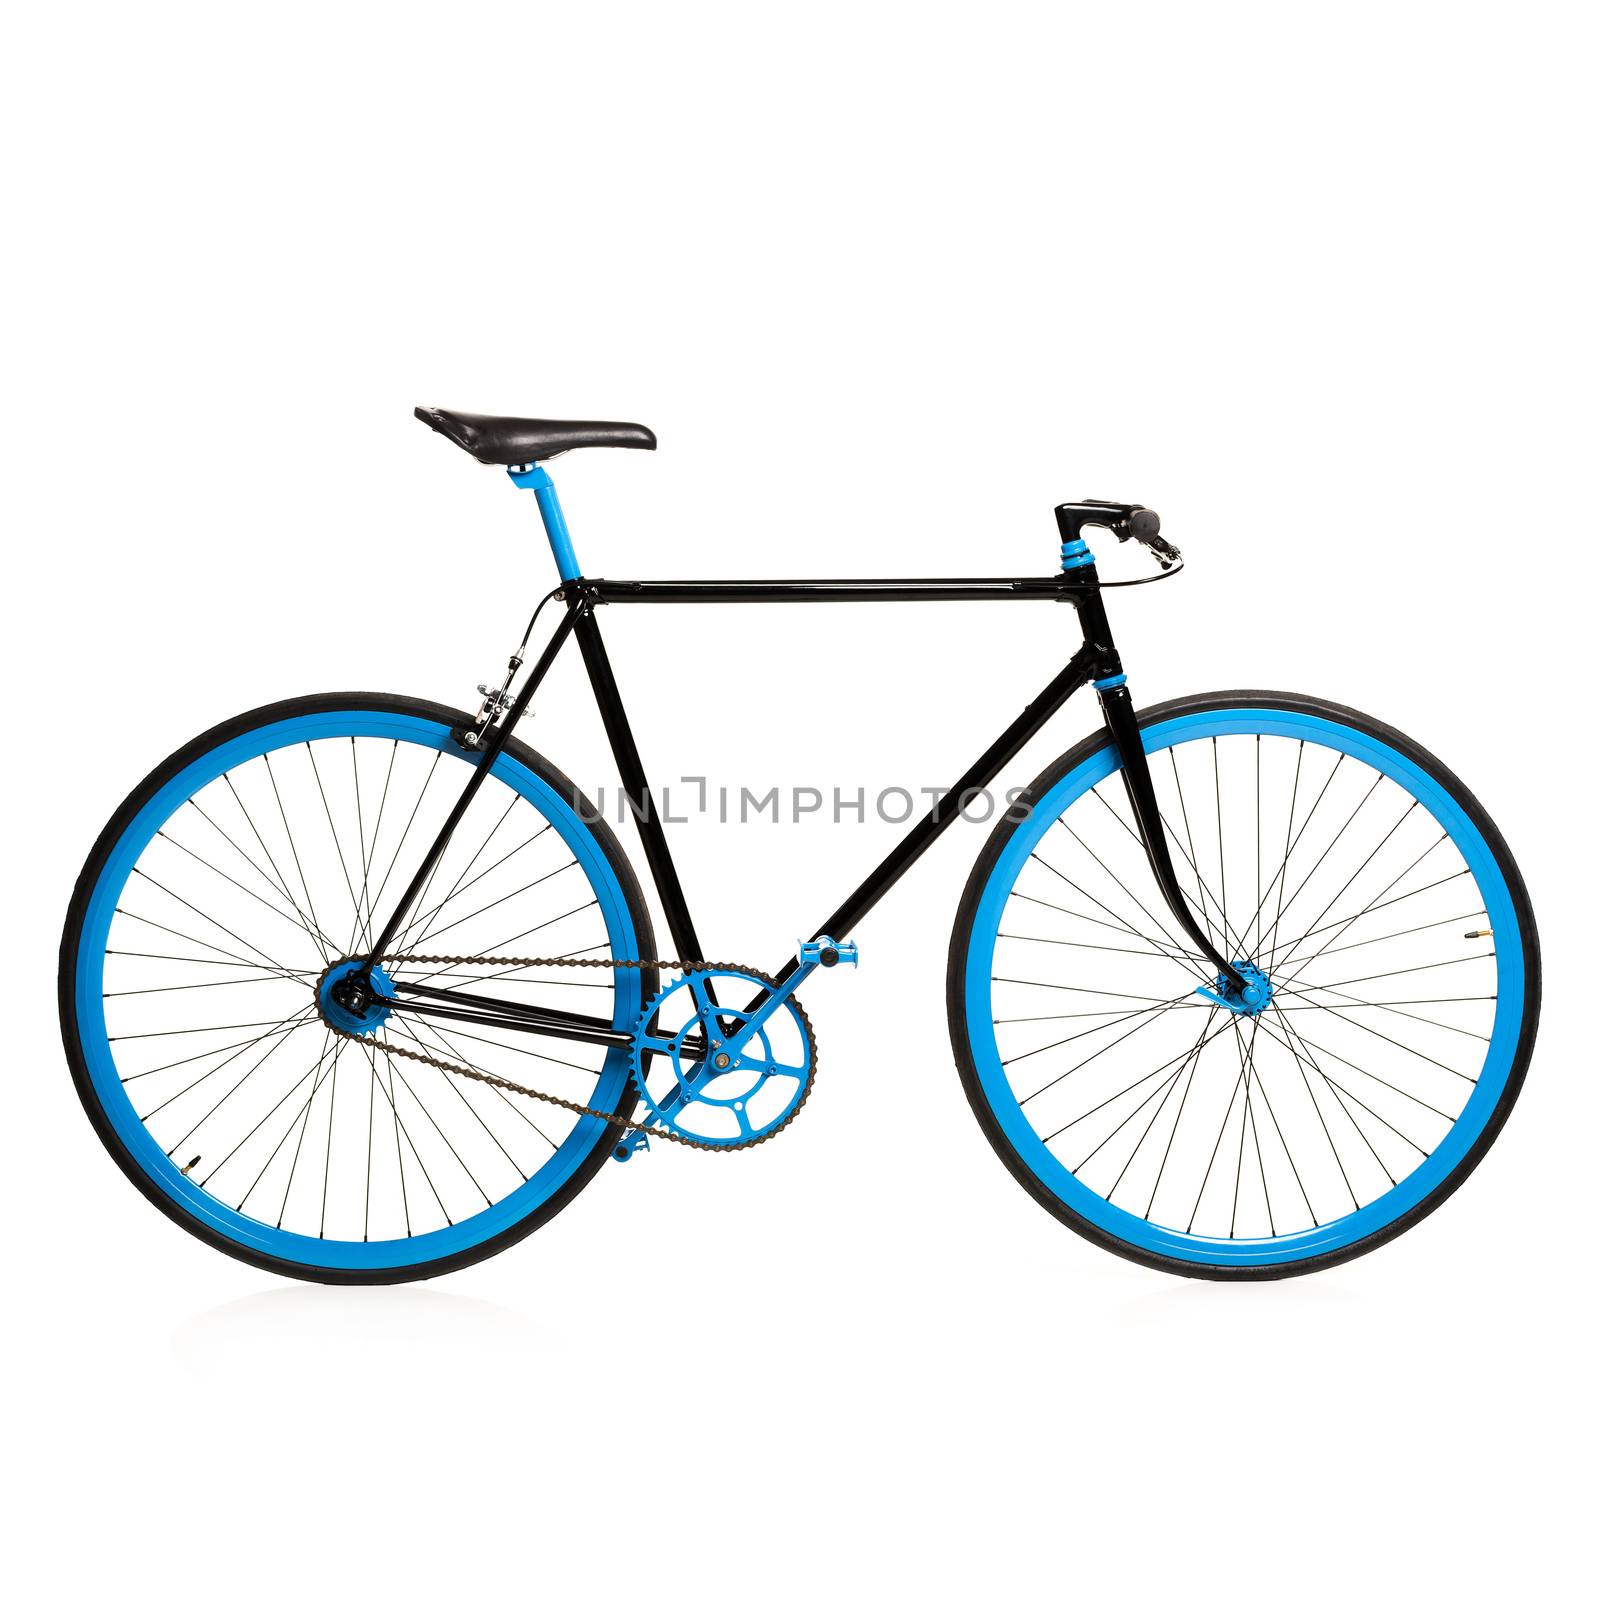 Stylish blue bicycle isolated on white by vlad_star